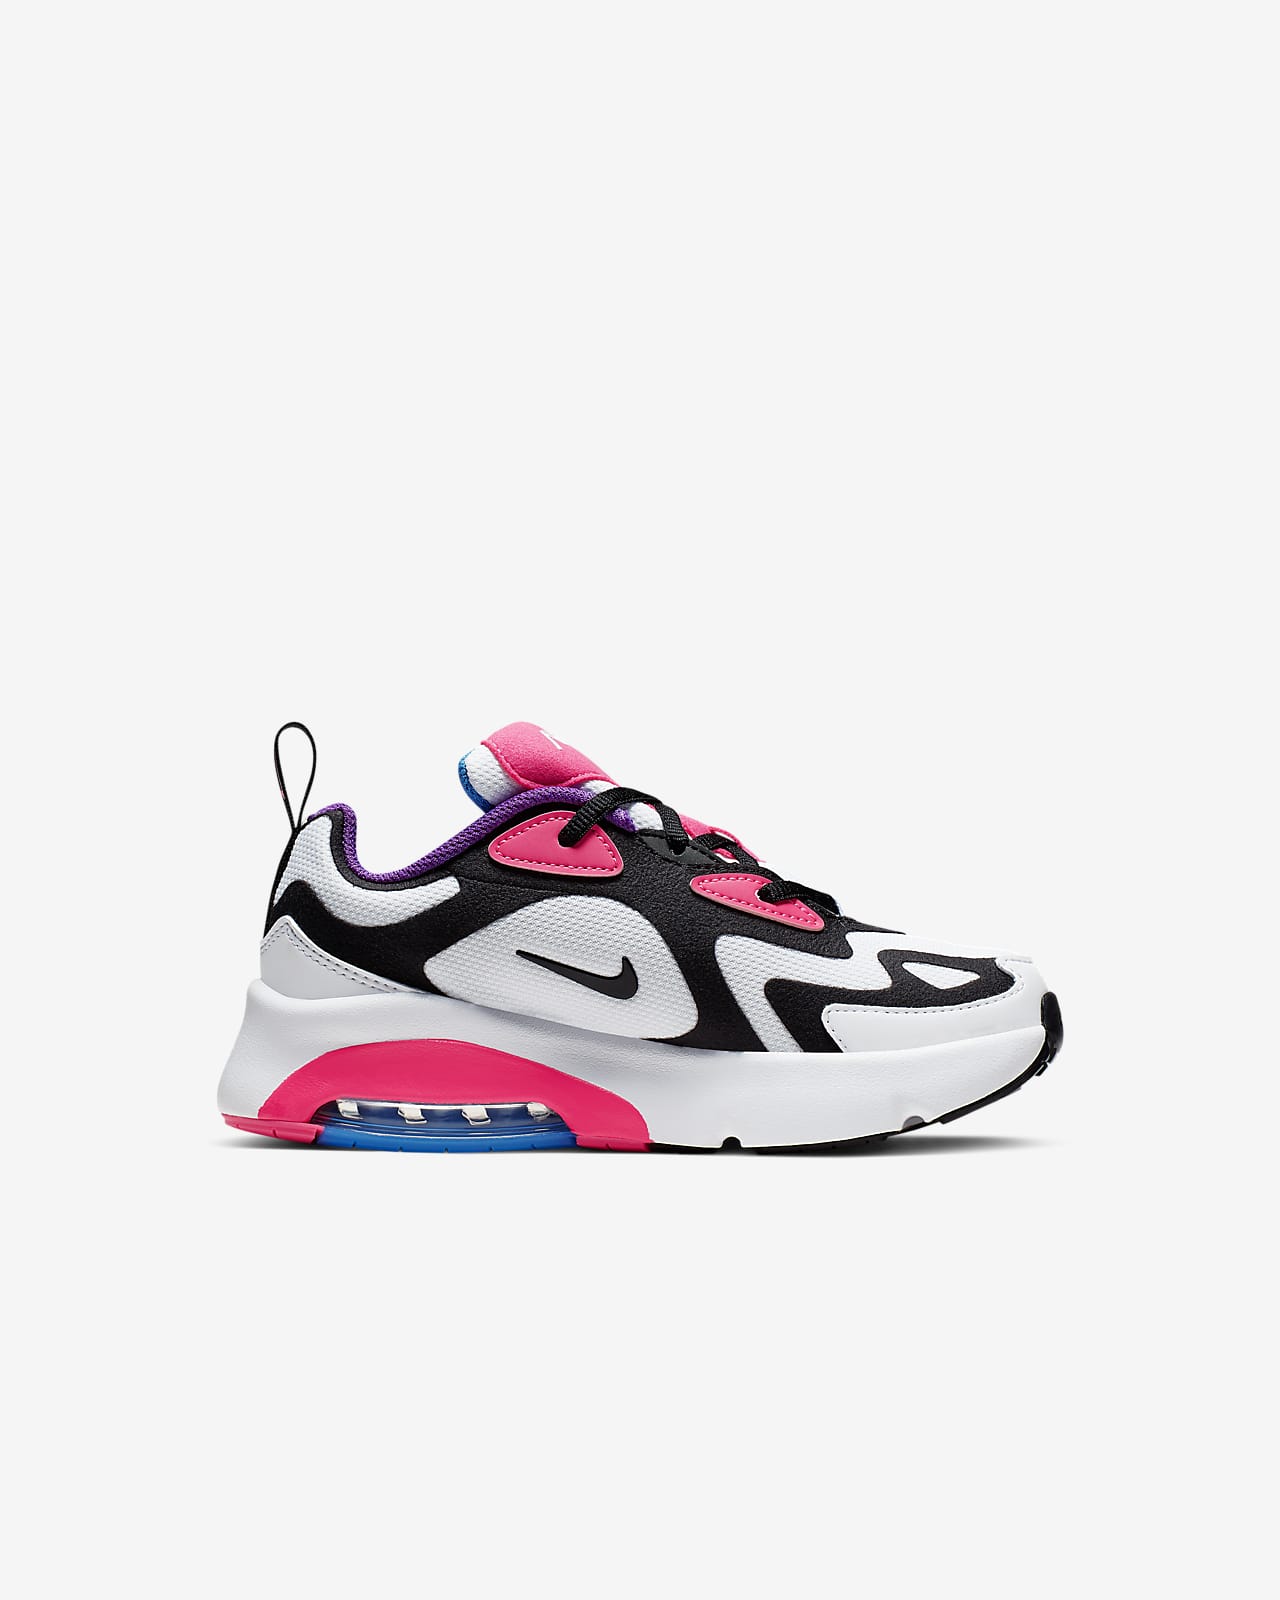 Nike Air Max 200 Younger Kids' Shoe 